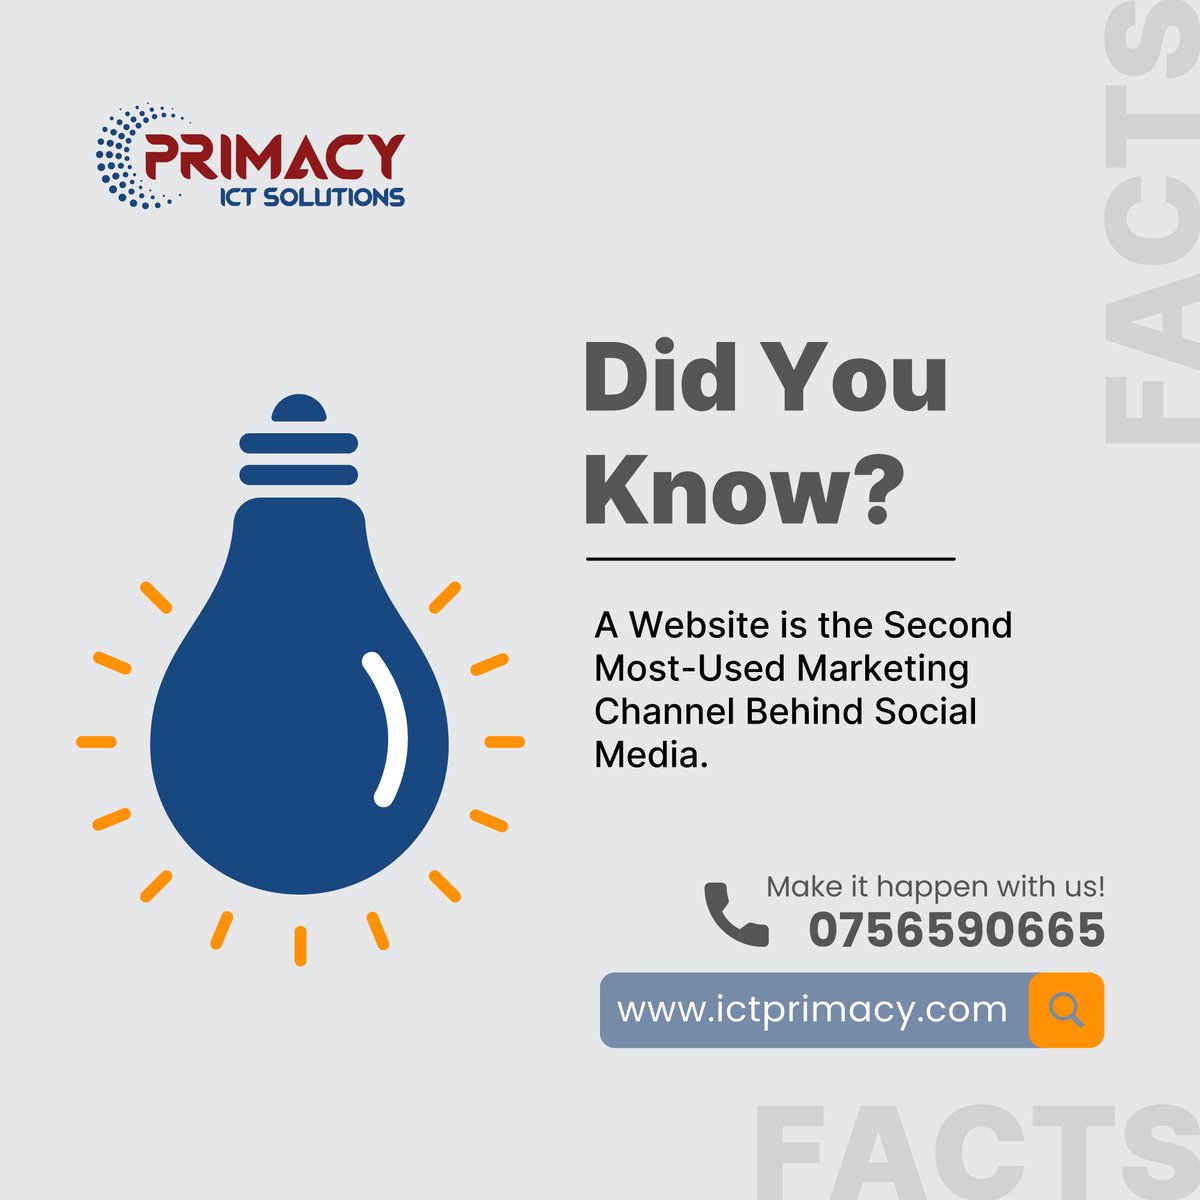 Did you know!!!
#Primacy #ITSolutions